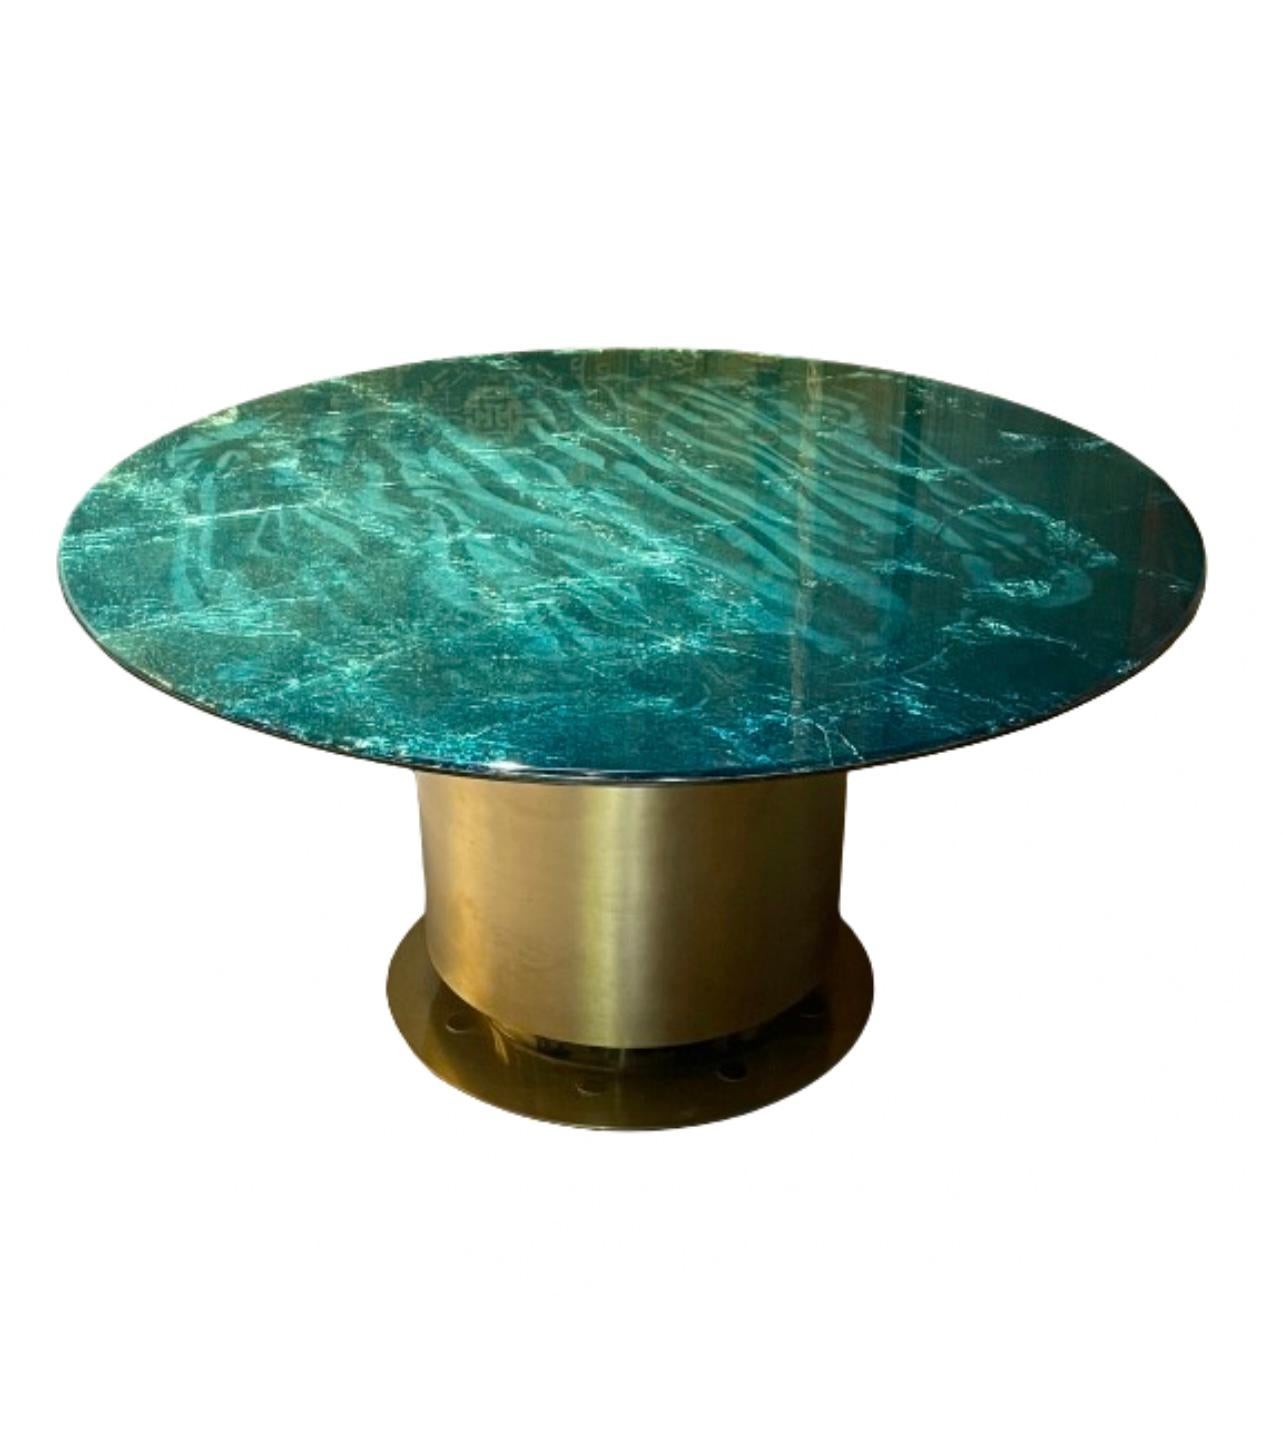 The Getsumei Editions centre table from RIZO’s range of luxe-living is a celestial-inspired everyday masterpiece. The tabletop is a swirling blend of deep midnight blues and radiant golds, reminiscent of the moon and sun. Its design form and